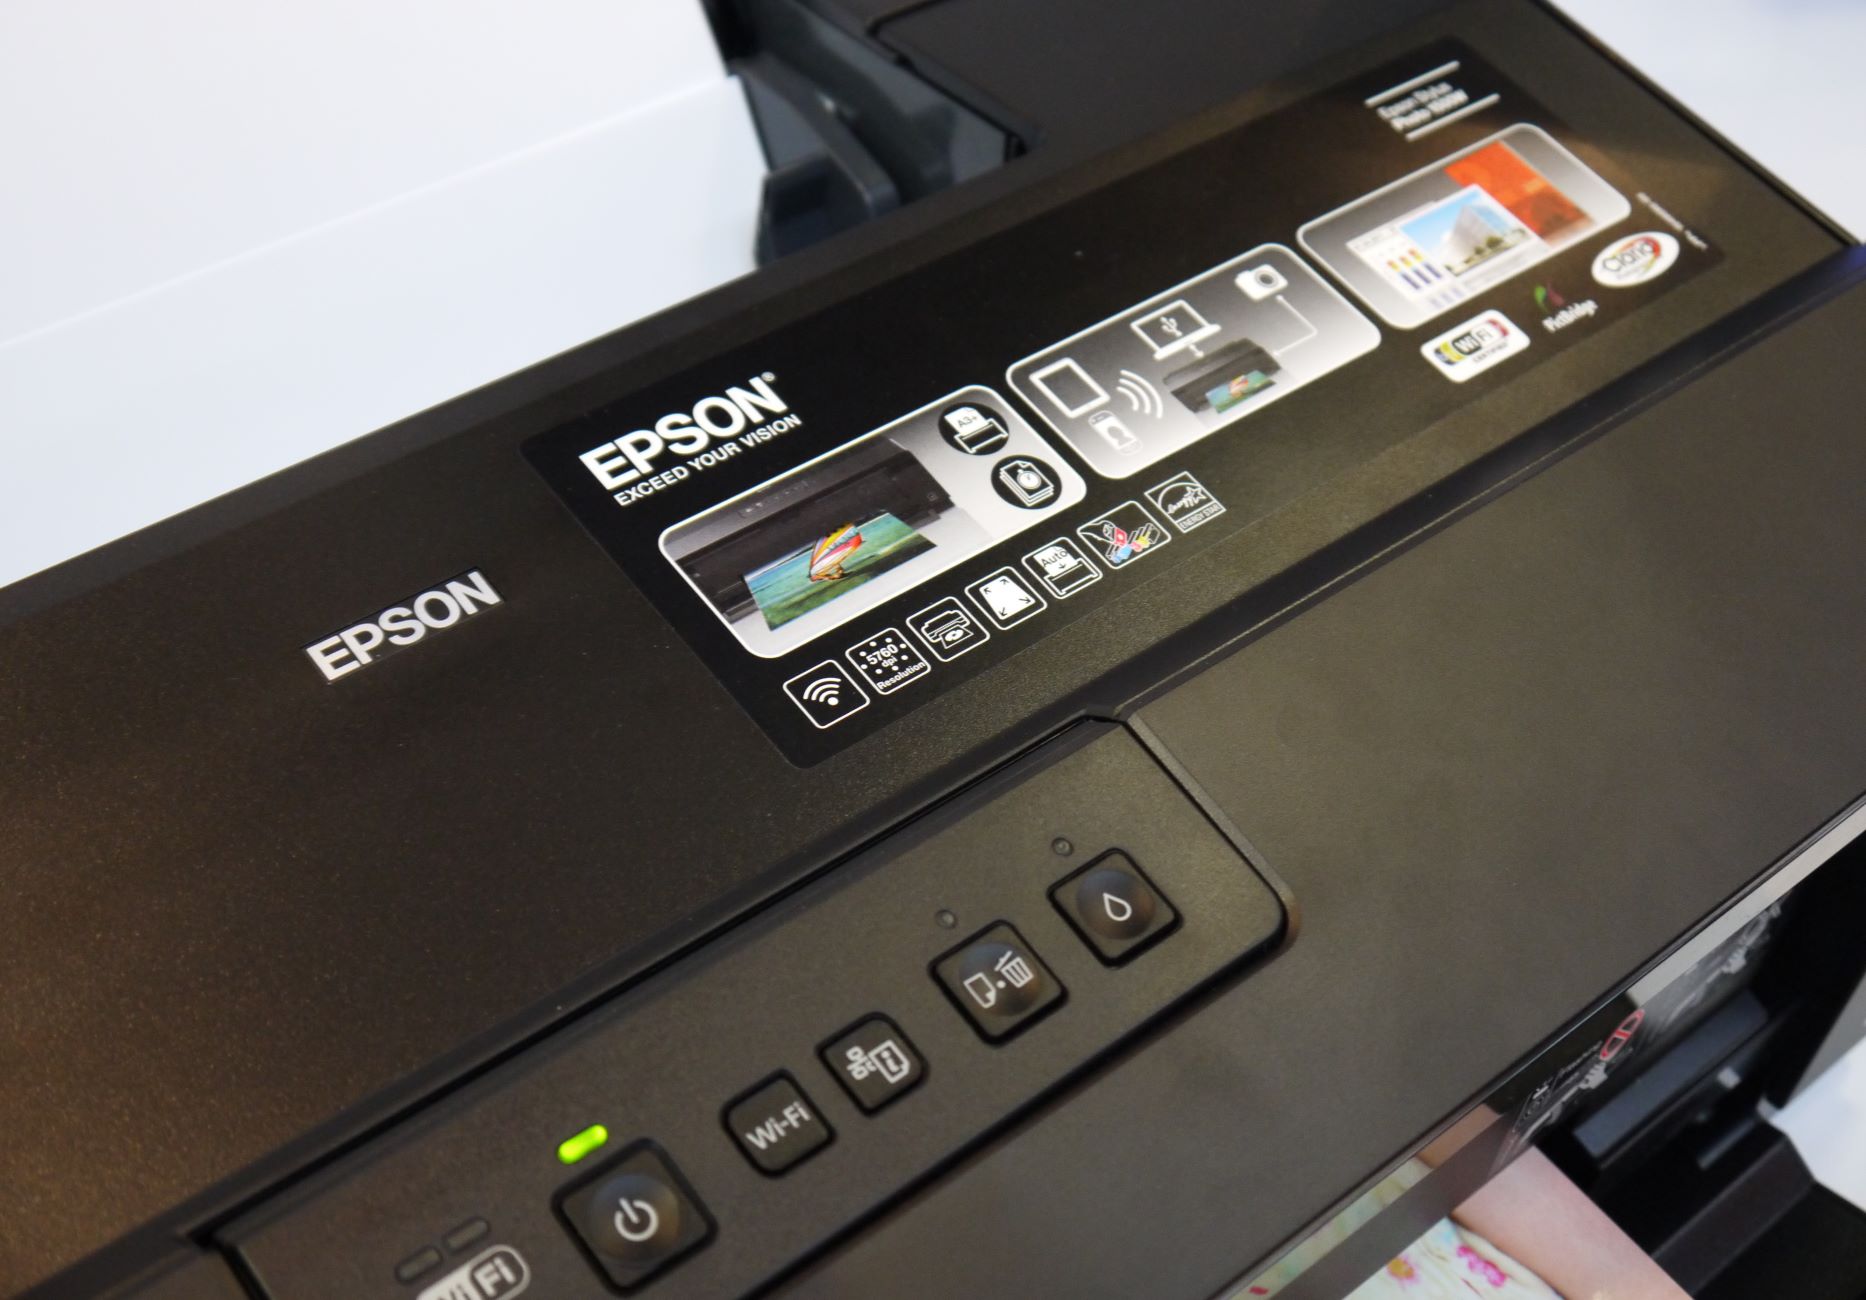 How To Connect Wi-Fi On Epson Printer